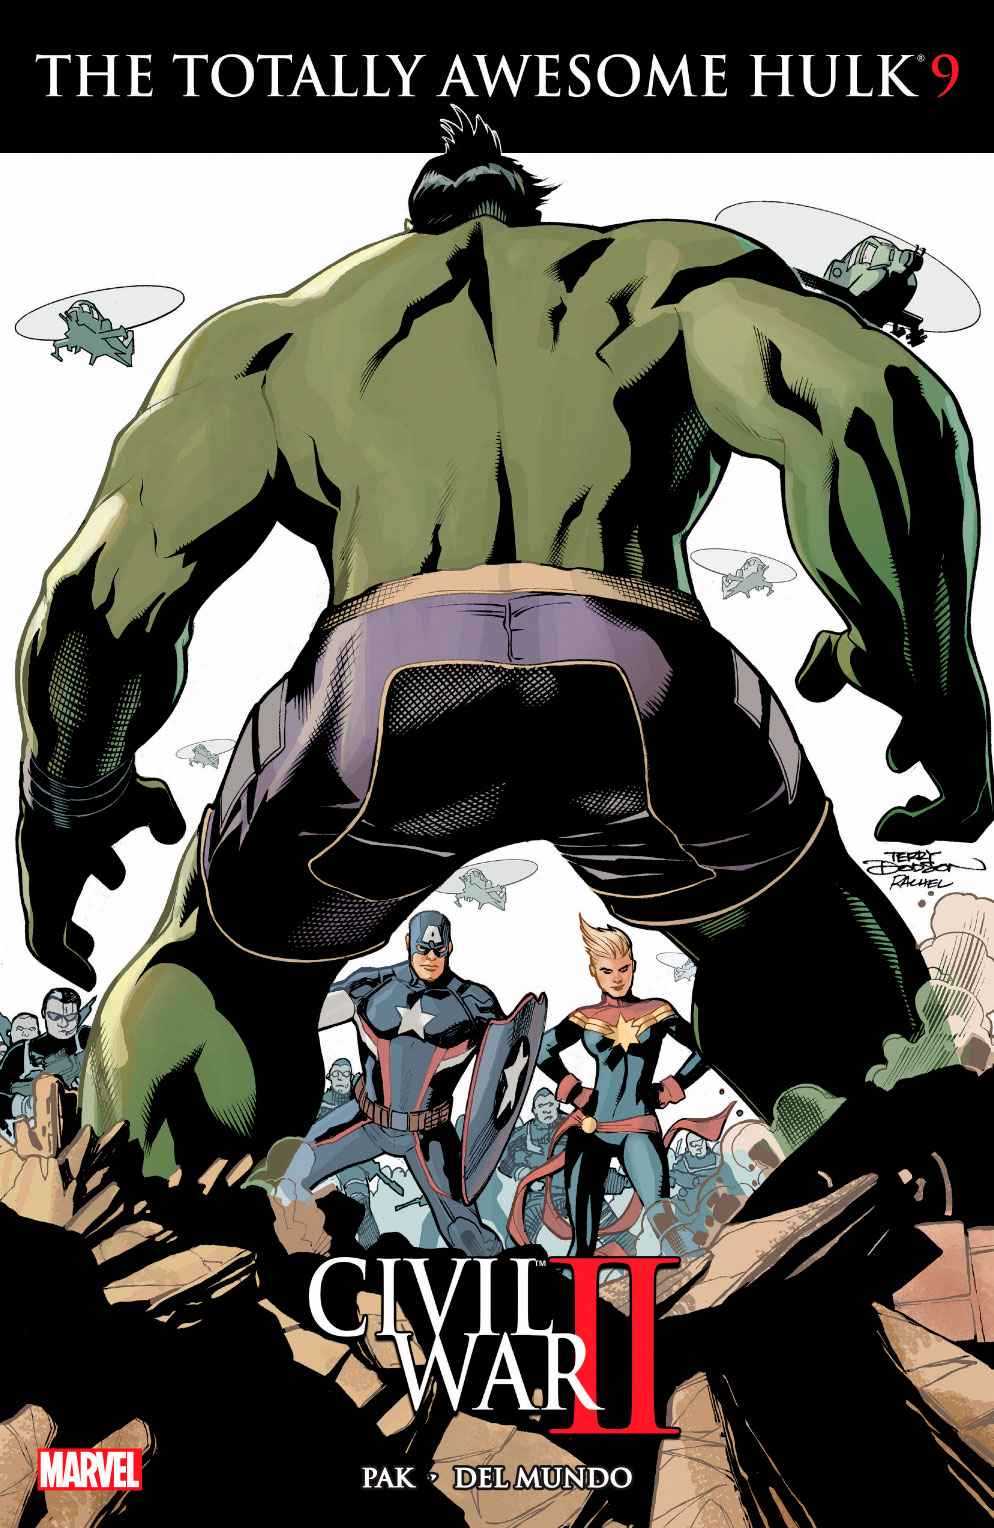 Marvel Announces New 'Totally Awesome Hulk' Comic Book Series